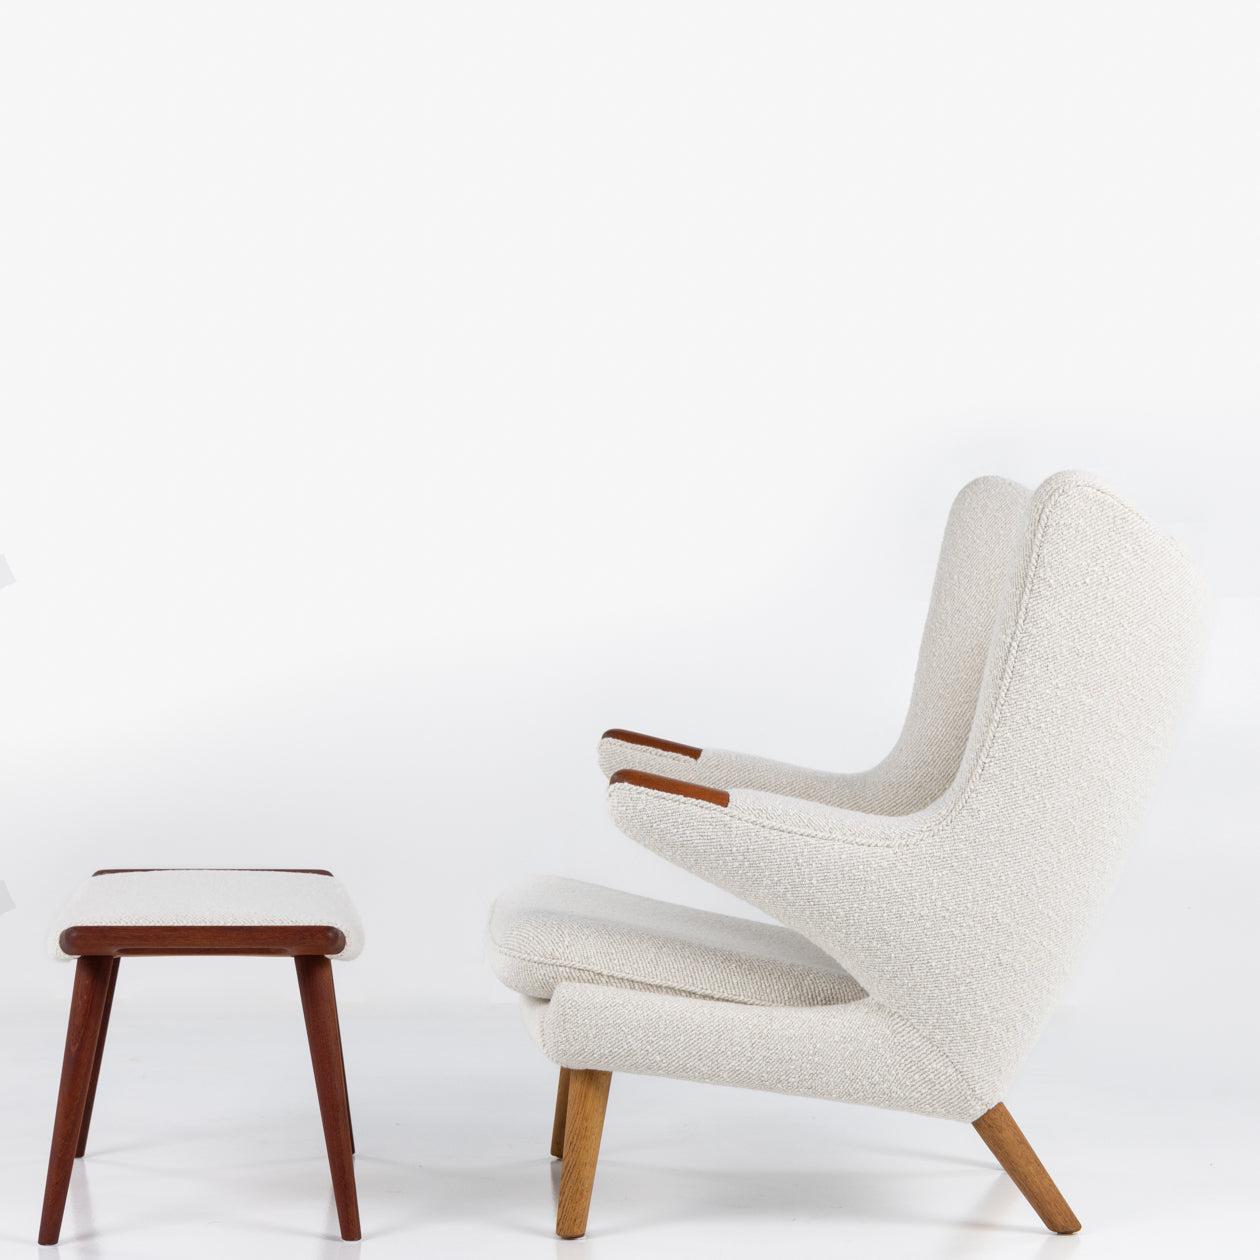 AP 19 - Papa Bear chair & stool in new fabric by Hans J. Wegner In Excellent Condition For Sale In Copenhagen, DK